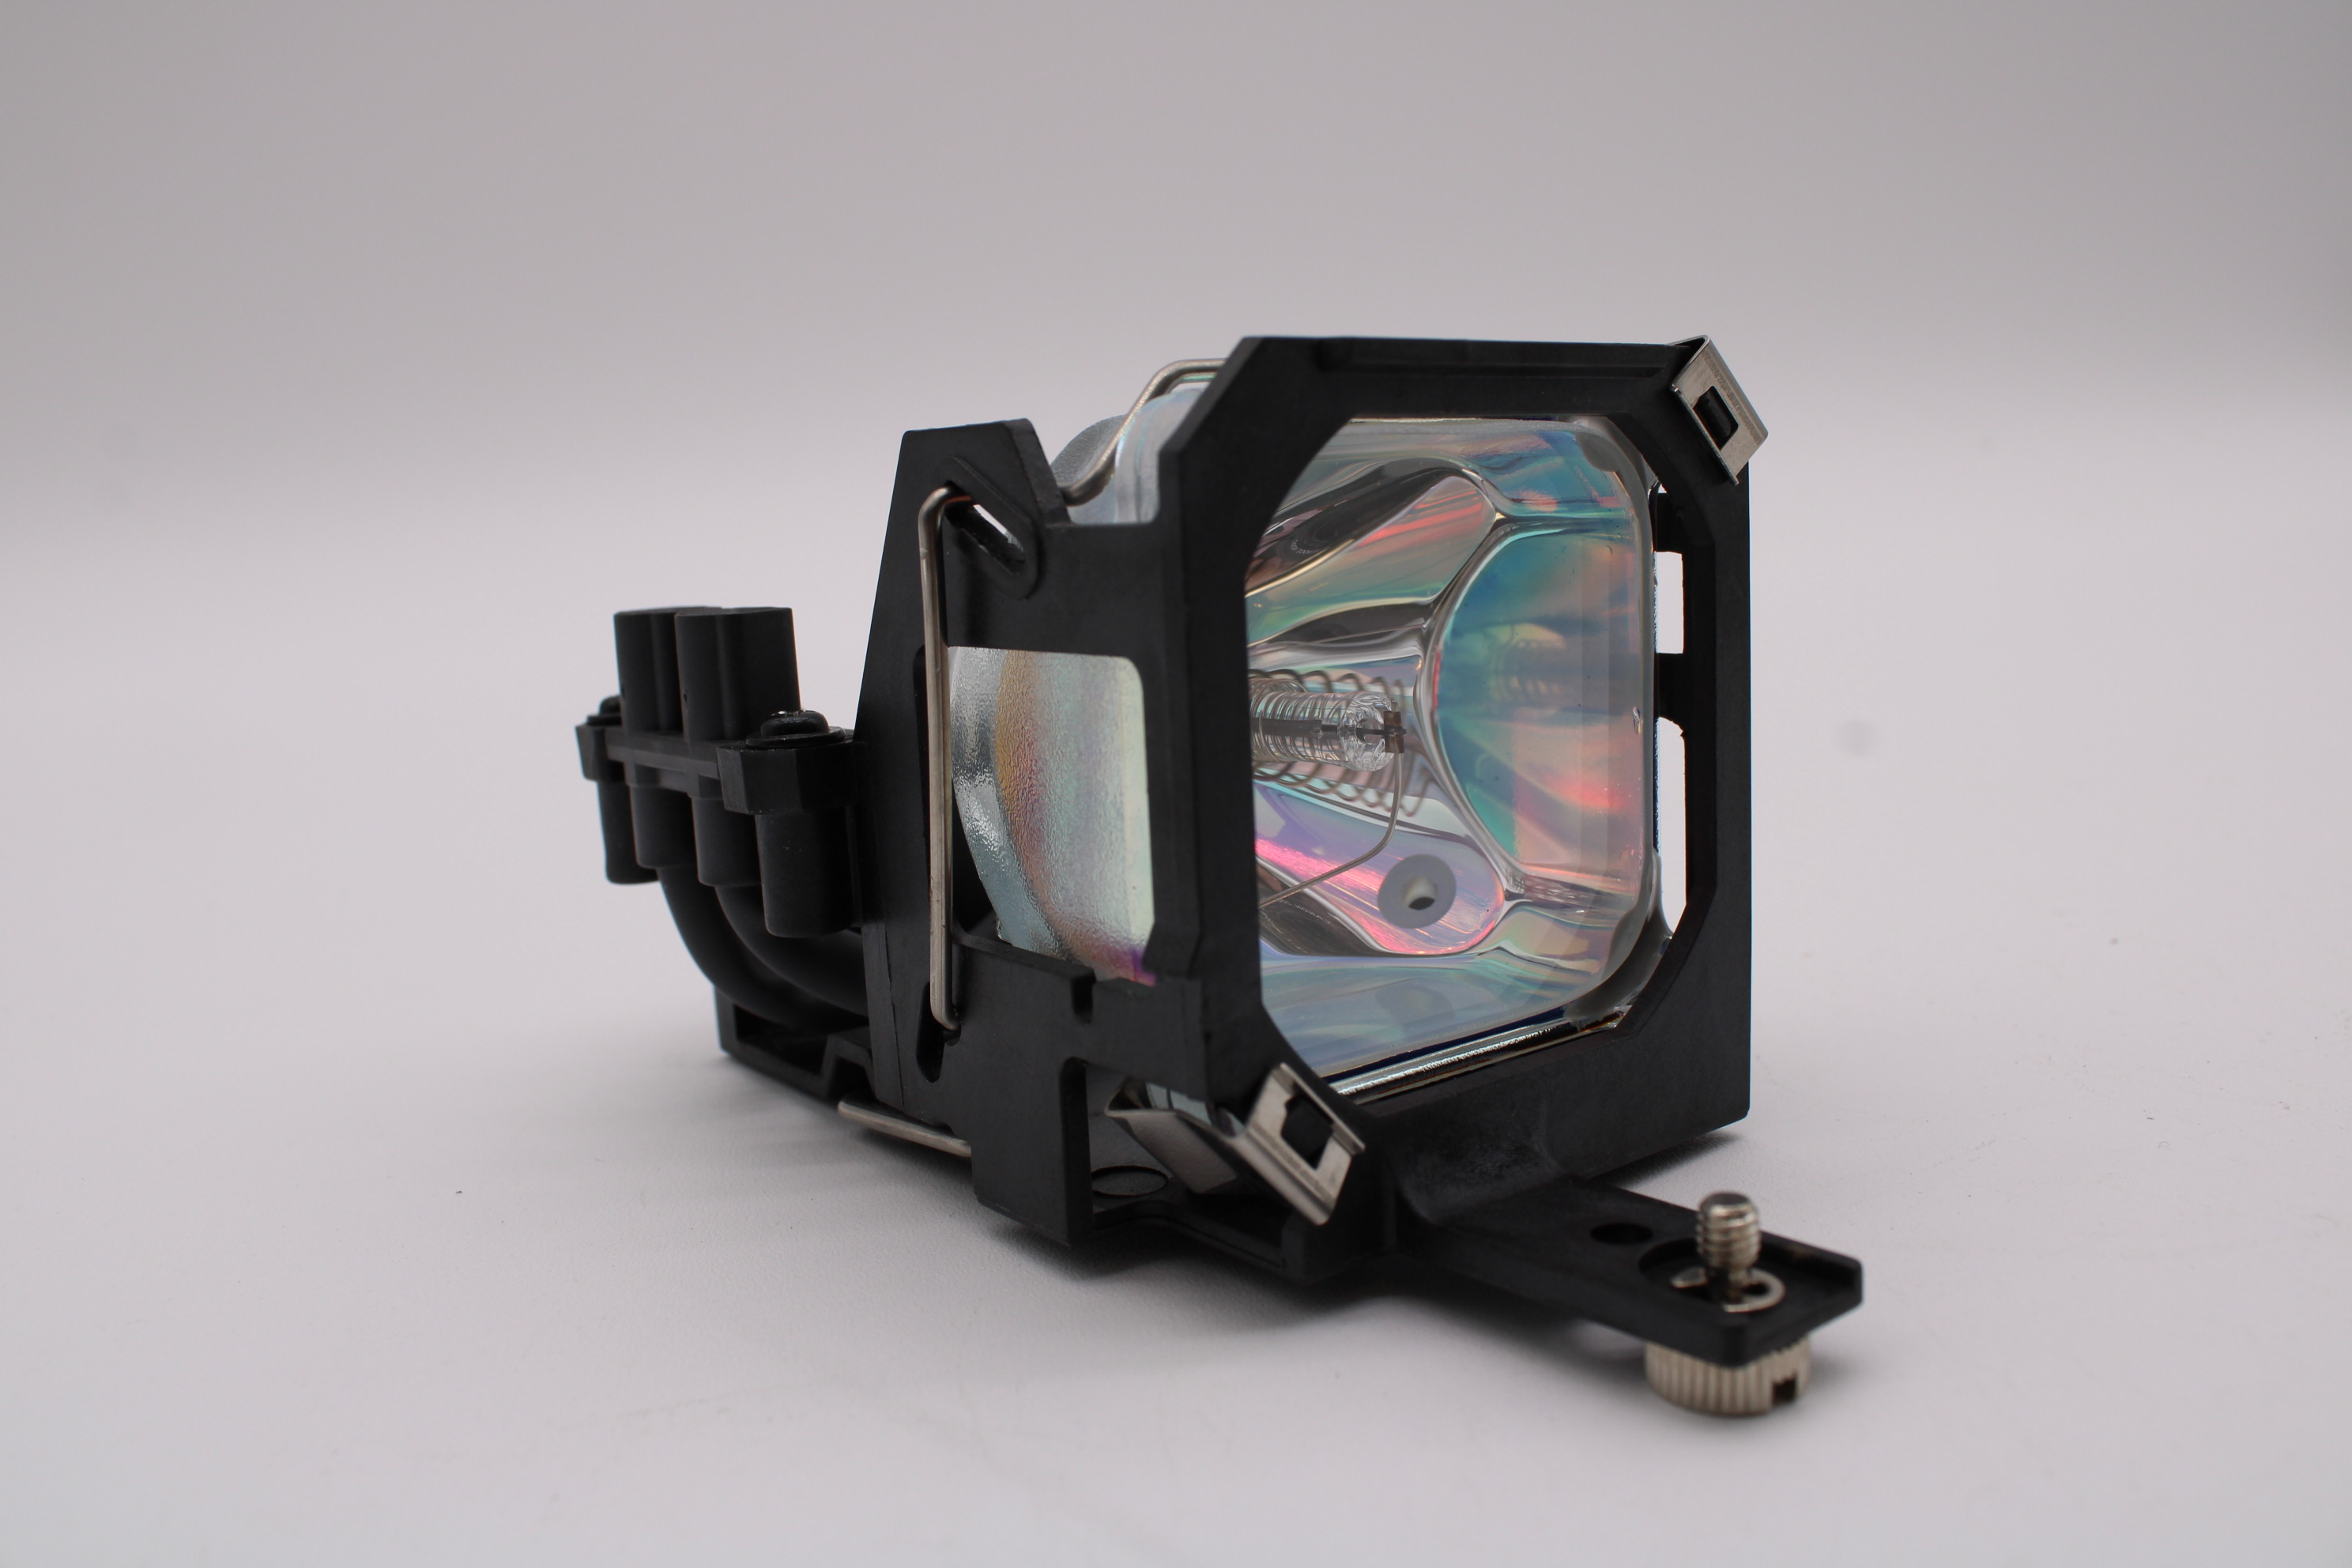 CTX Genuine AL™ Lamp & Housing for the CTX PS-5100 Projector - 90 Day Warranty